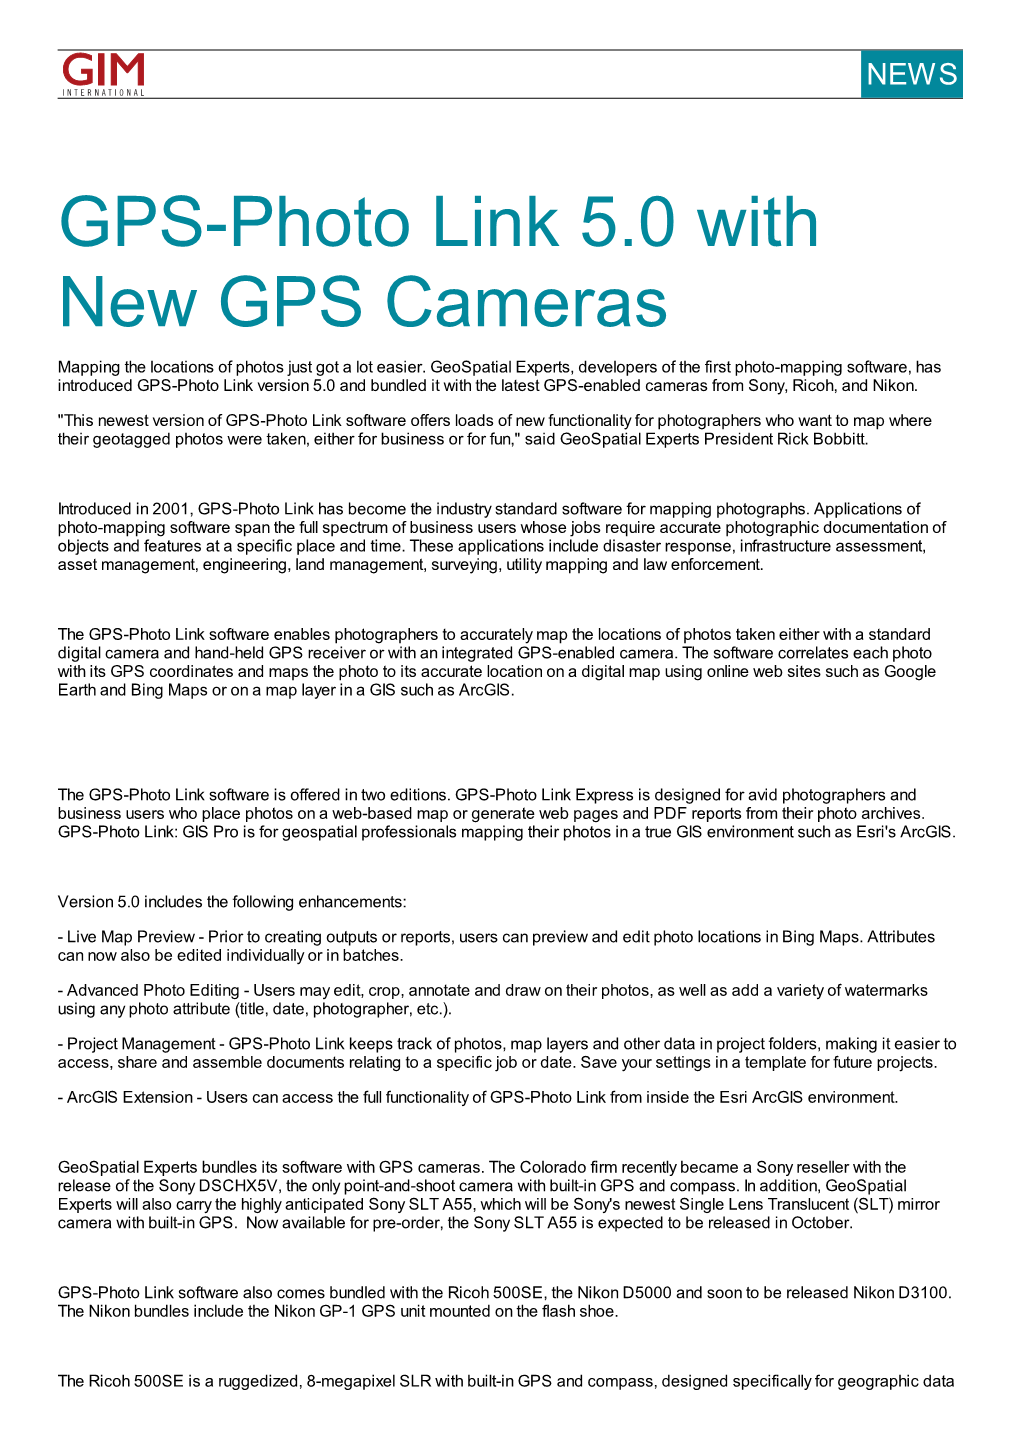 GPS-Photo Link 5.0 with New GPS Cameras